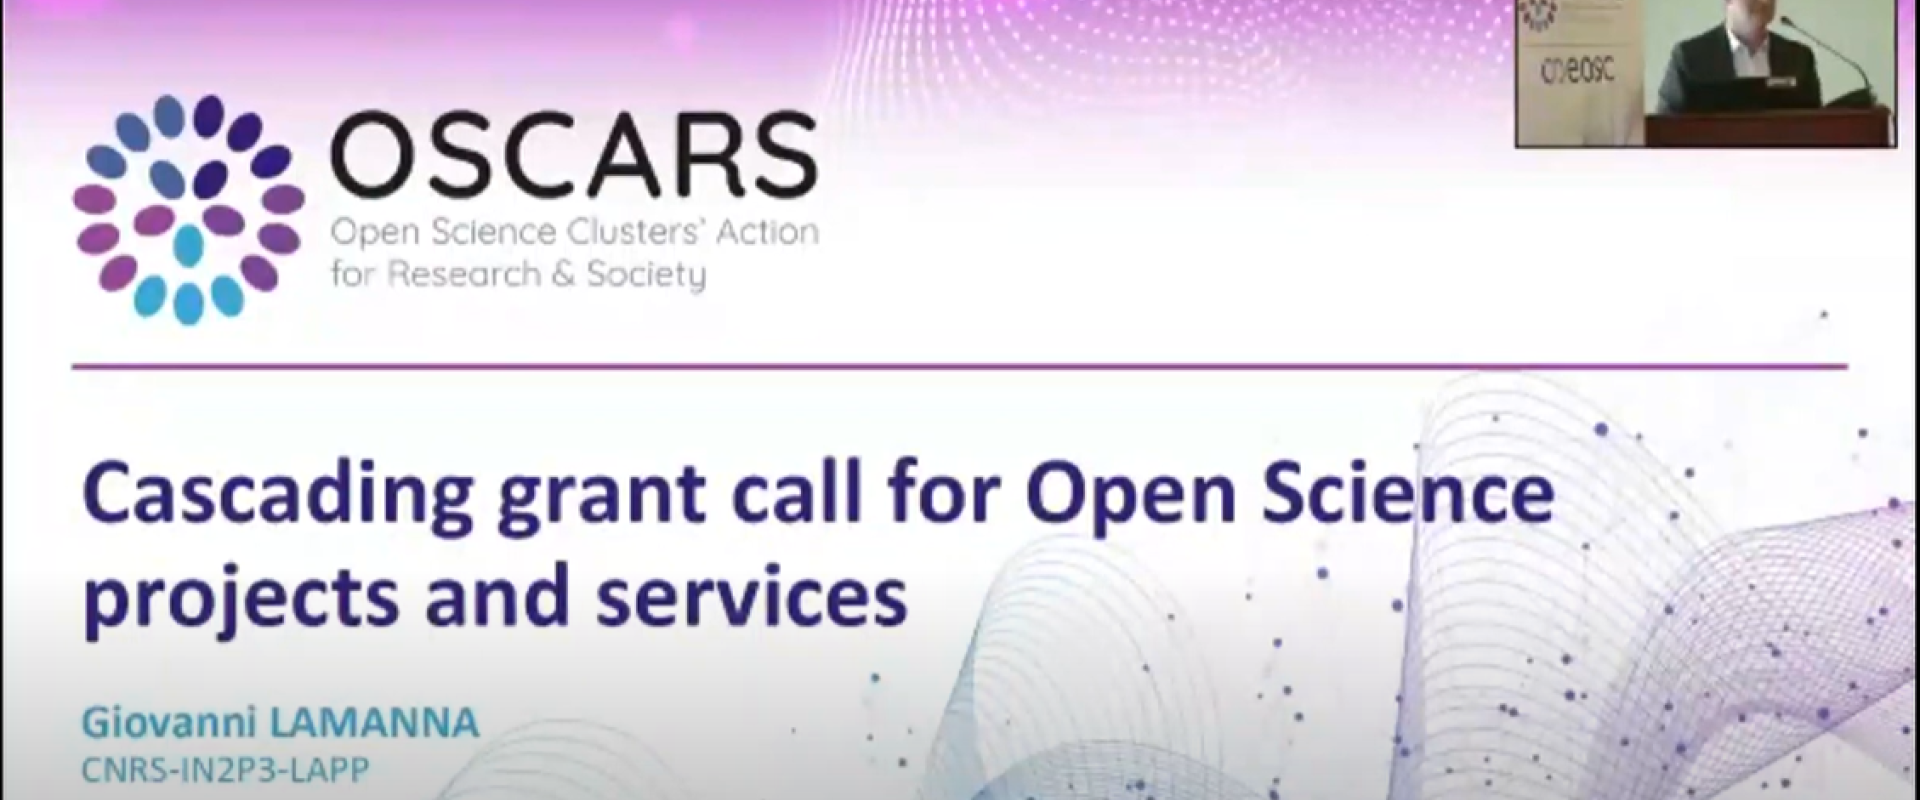 OSCARS 1st Open Call for Open Science projects and services